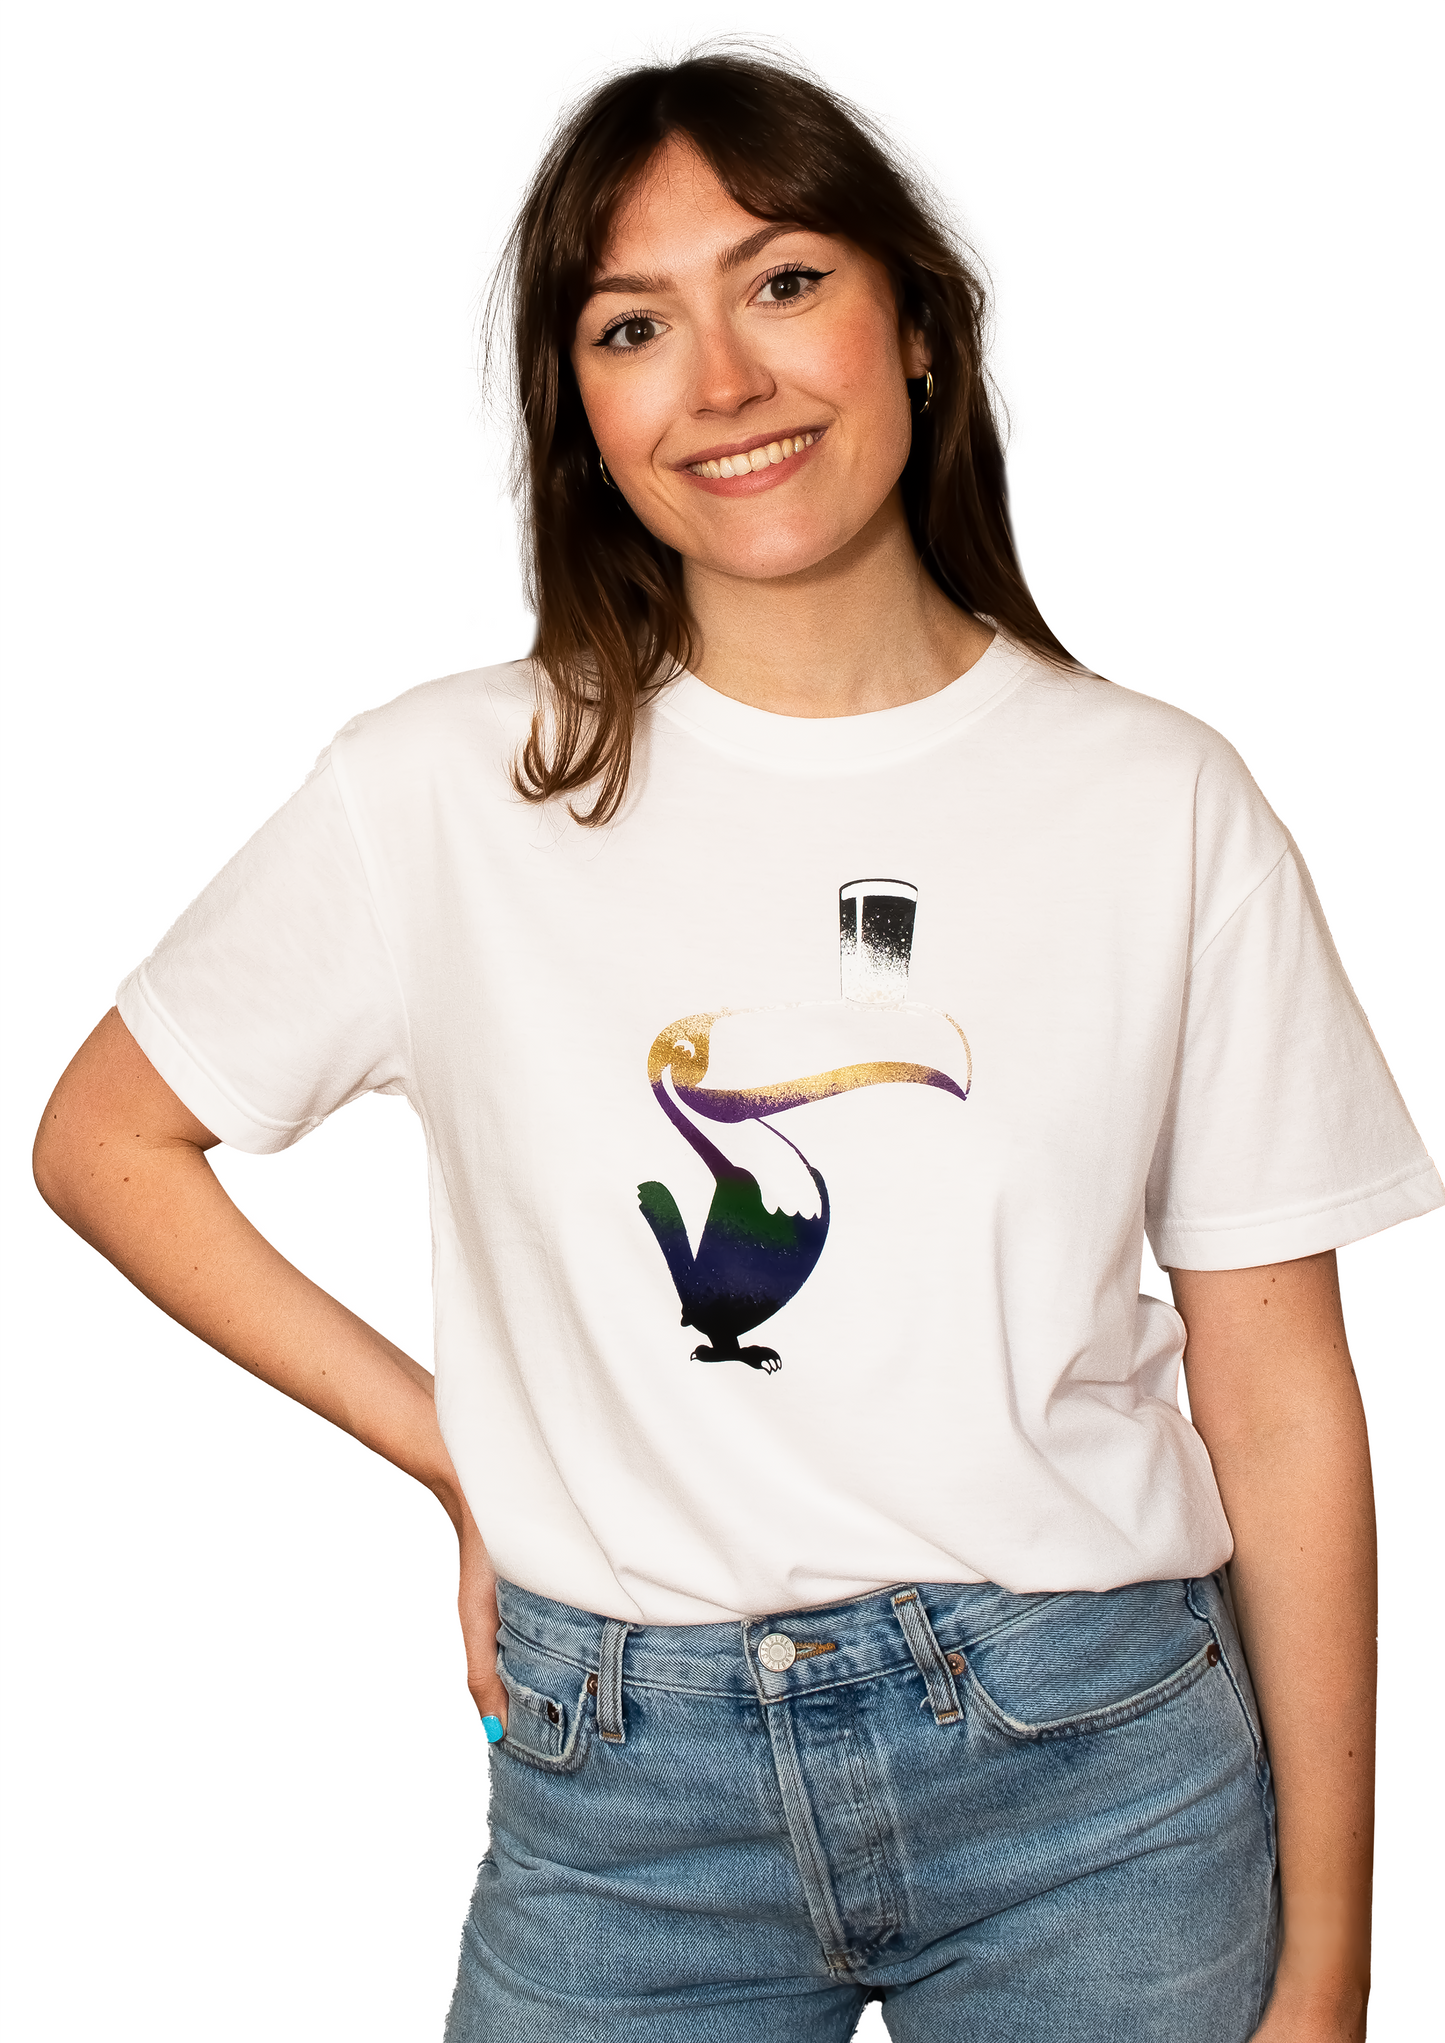 A woman smiling with her hand on her hip, wearing a White Guinness Liquid Toucan Tee made of BCI cotton.